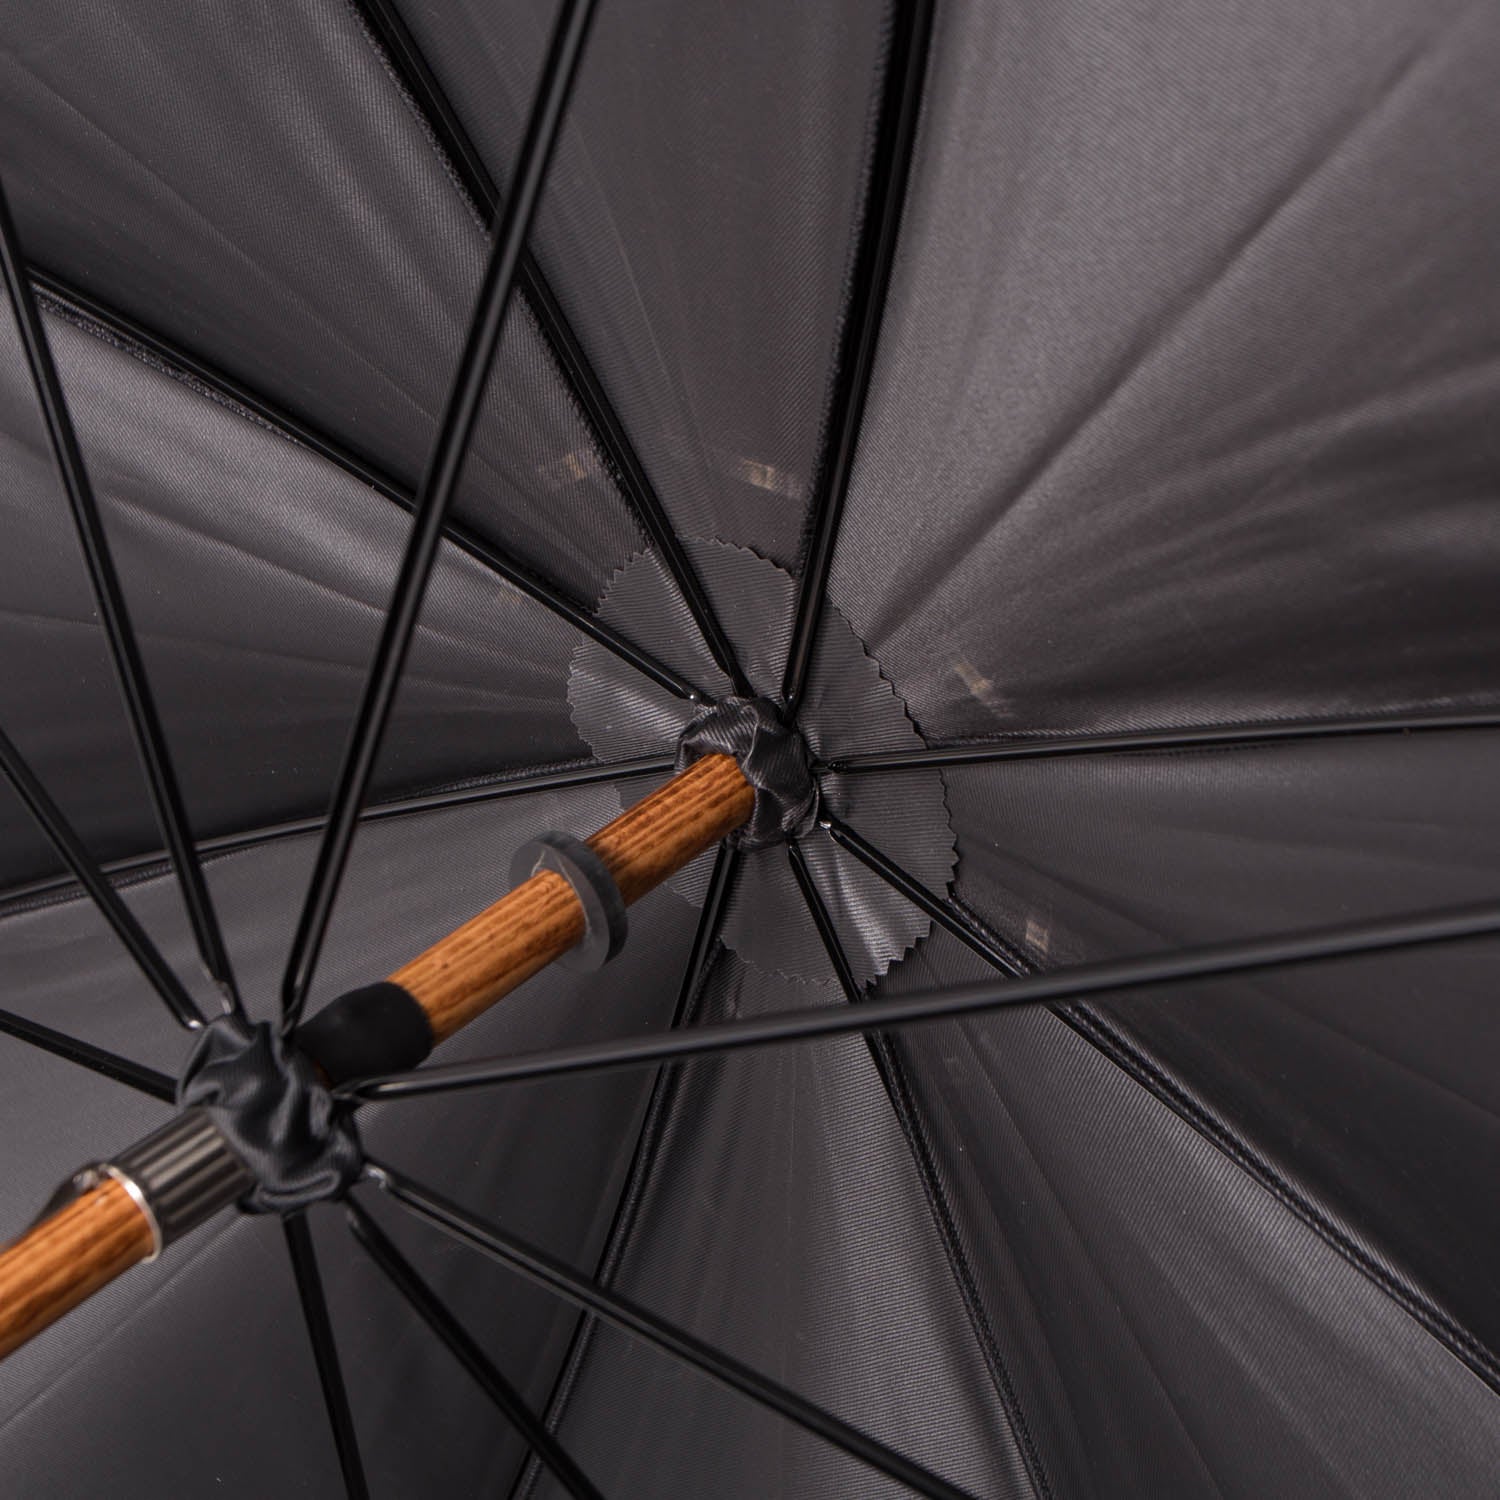 A close up of a Black Doorman Umbrella with Malacca Handle from KirbyAllison.com.